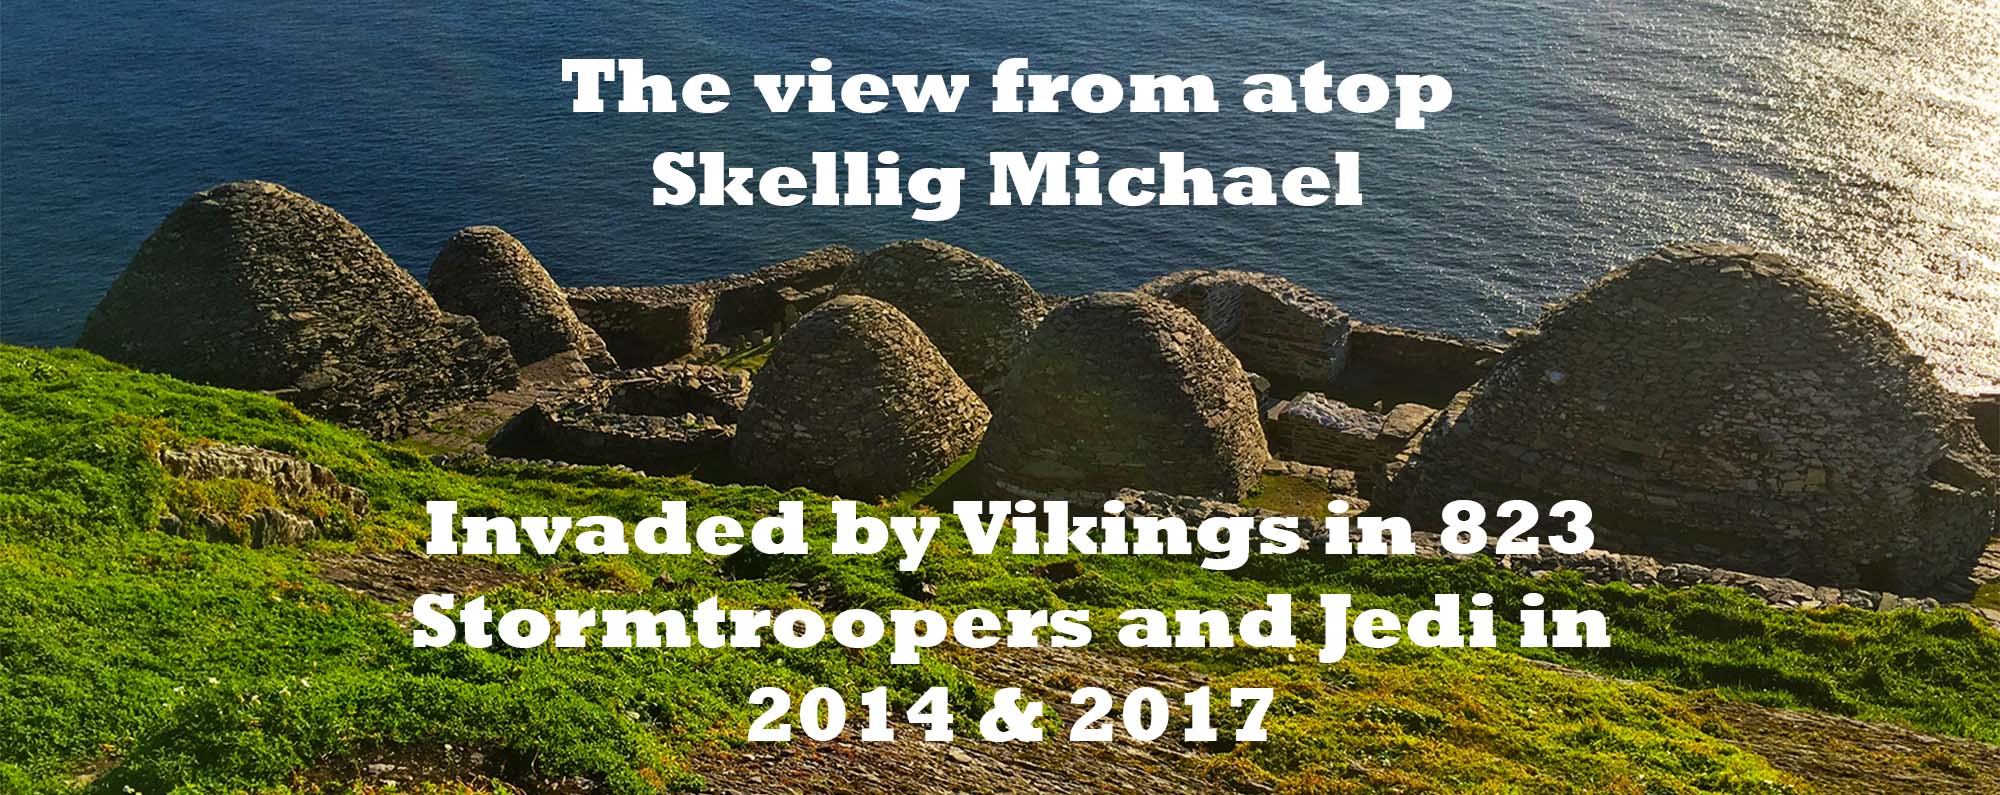 beehive hust and invaders information on skellig michael